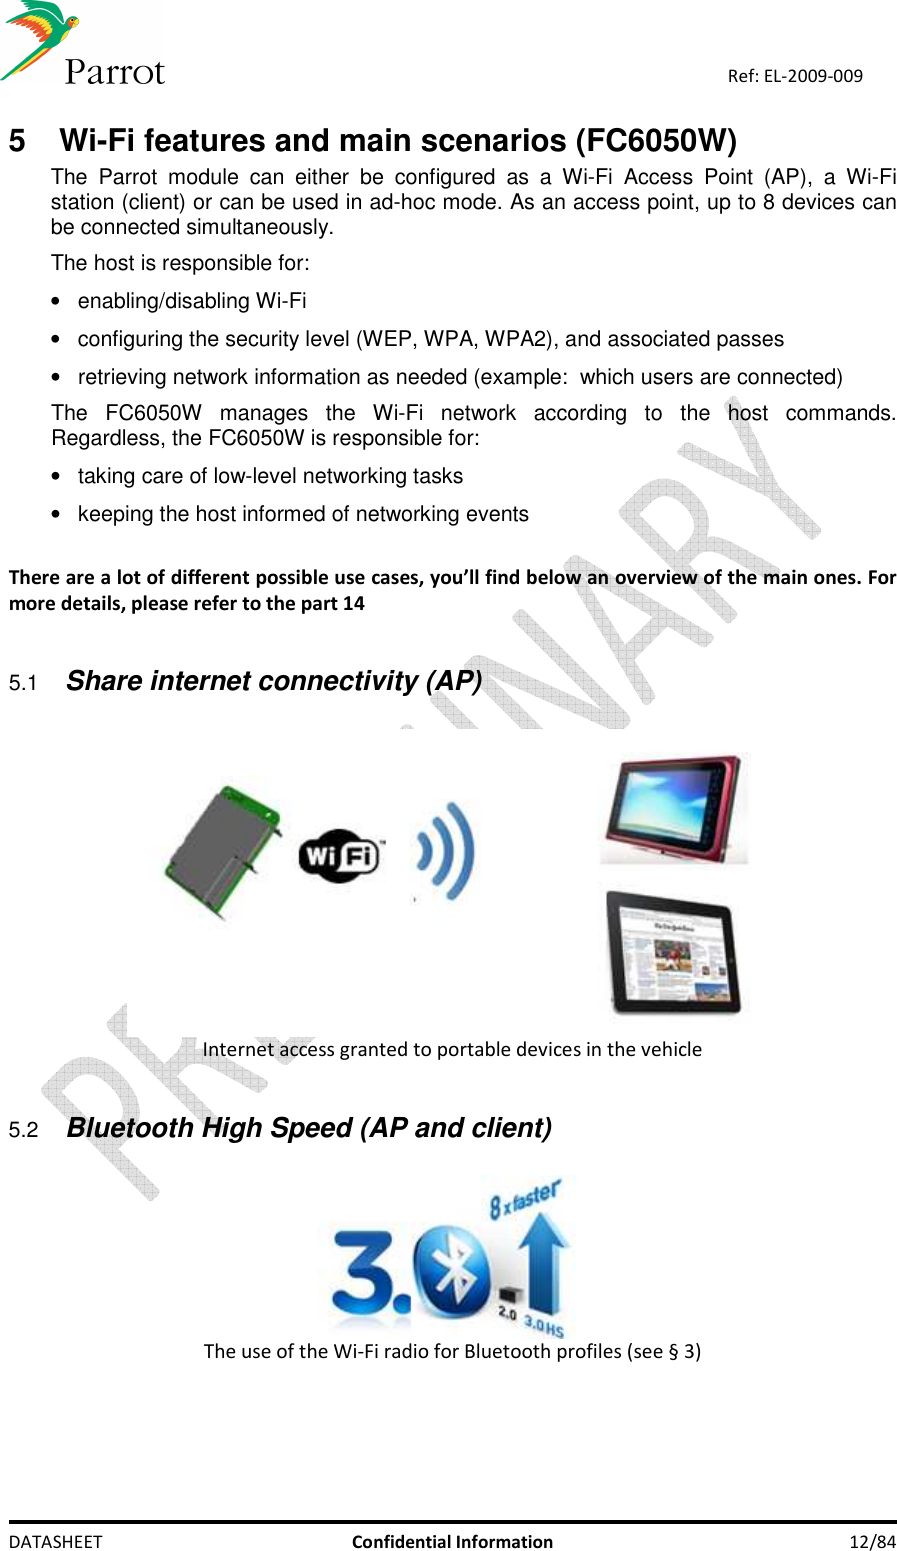    DATASHEET  Confidential Information  12/84 Ref: EL-2009-009 5   Wi-Fi features and main scenarios (FC6050W)  The  Parrot  module  can  either  be  configured  as  a  Wi-Fi  Access  Point  (AP),  a  Wi-Fi station (client) or can be used in ad-hoc mode. As an access point, up to 8 devices can be connected simultaneously. The host is responsible for: •  enabling/disabling Wi-Fi  •  configuring the security level (WEP, WPA, WPA2), and associated passes  •  retrieving network information as needed (example:  which users are connected) The  FC6050W  manages  the  Wi-Fi  network  according  to  the  host  commands. Regardless, the FC6050W is responsible for: •  taking care of low-level networking tasks •  keeping the host informed of networking events  There are a lot of different possible use cases, you’ll find below an overview of the main ones. For more details, please refer to the part 14  5.1 Share internet connectivity (AP)   Internet access granted to portable devices in the vehicle  5.2 Bluetooth High Speed (AP and client)   The use of the Wi-Fi radio for Bluetooth profiles (see § 3)   